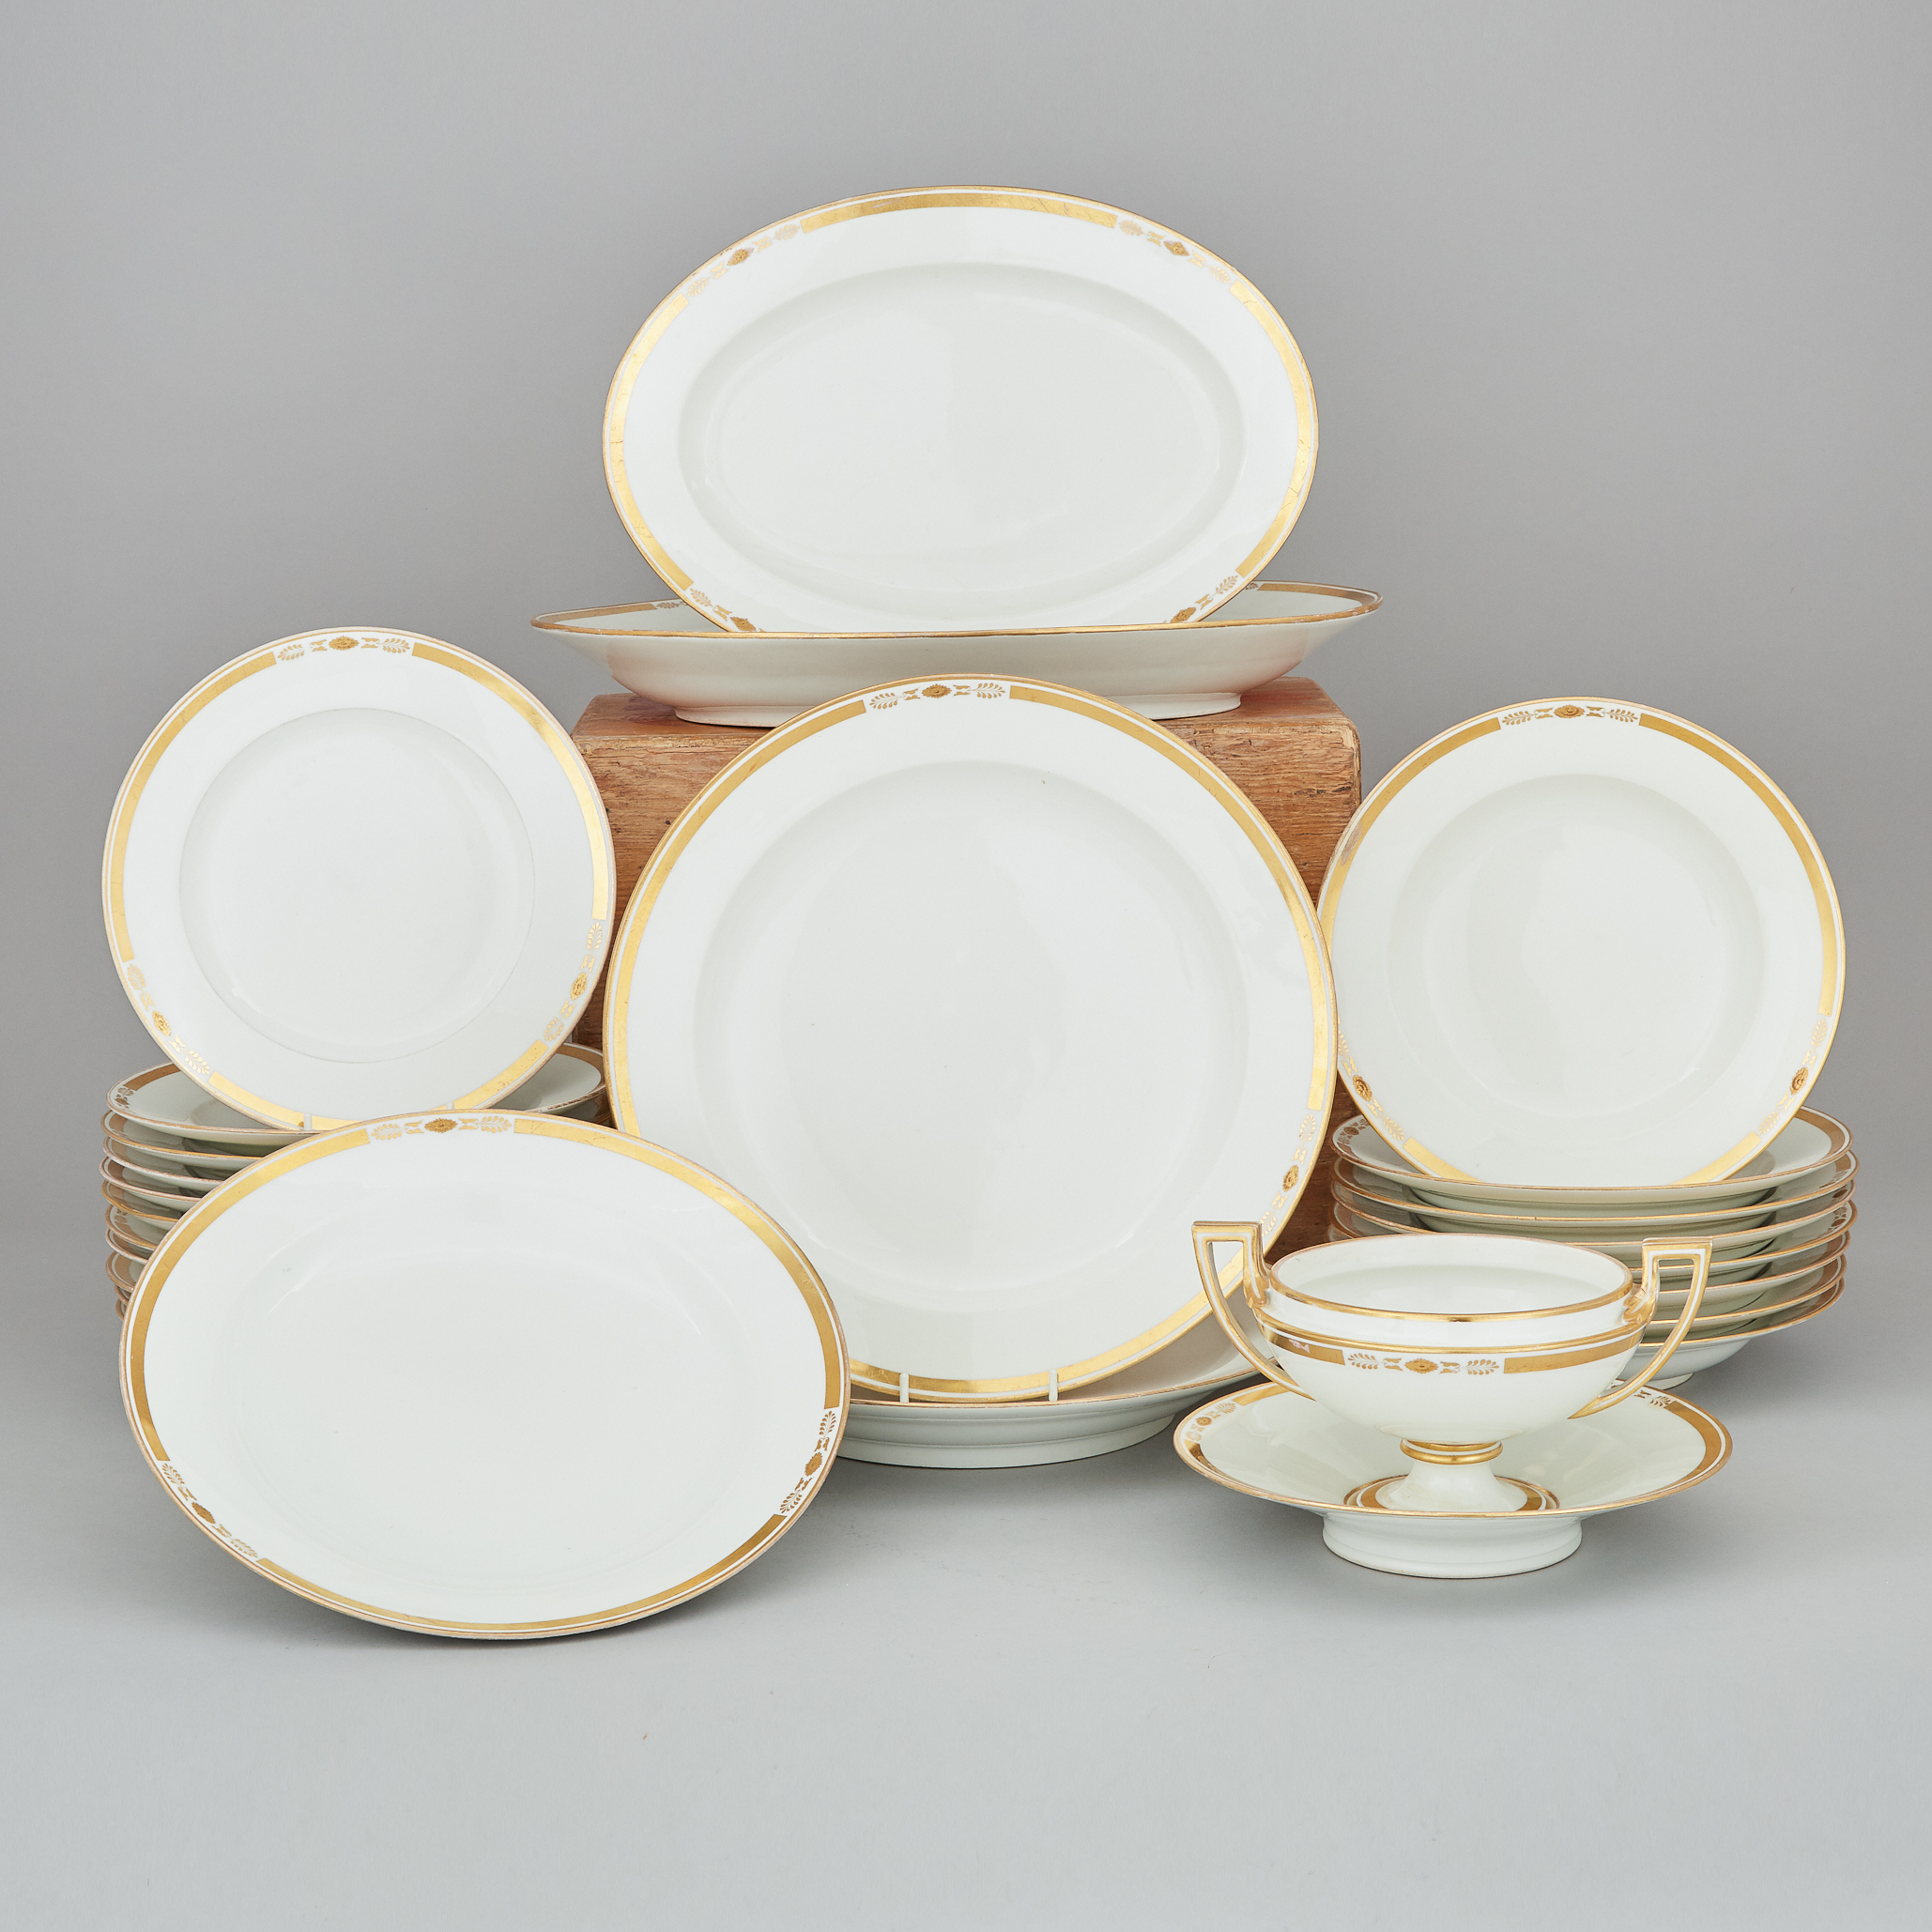 Vienna Gilt Decorated Dinner Service, early 19th century